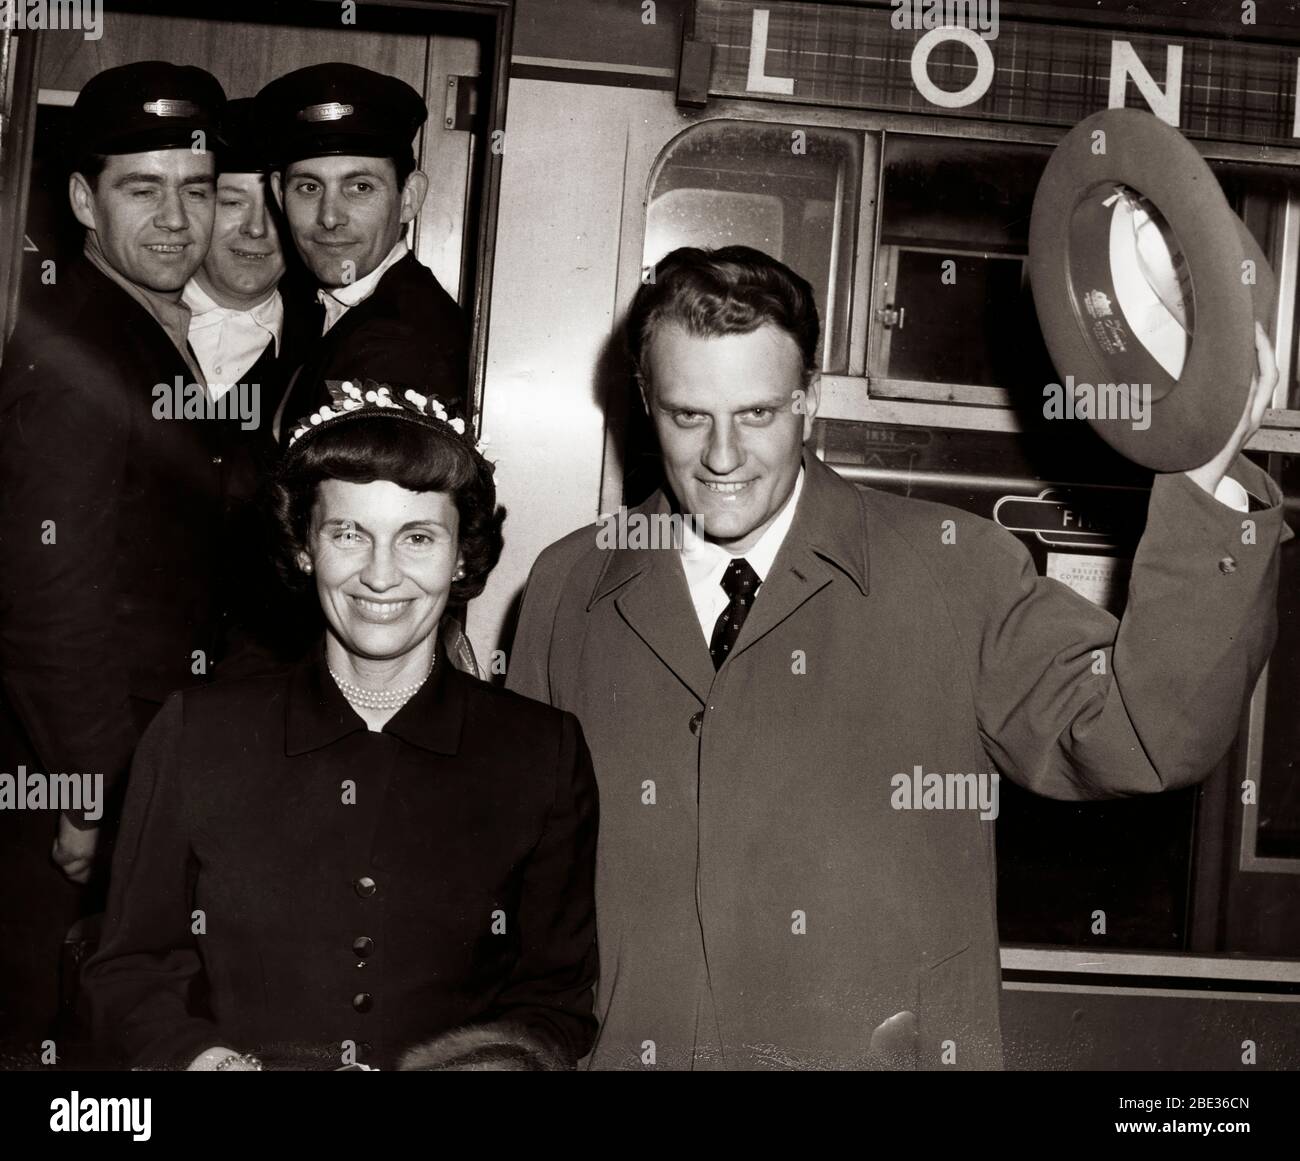 May 11, 1955 - London, England, U.K. - Reverend BILLY GRAHAM arrives at Euston Railway Station from Scotland with his wife RUTH for his crusade which will be taking place at Wembley Stadium. Stock Photo